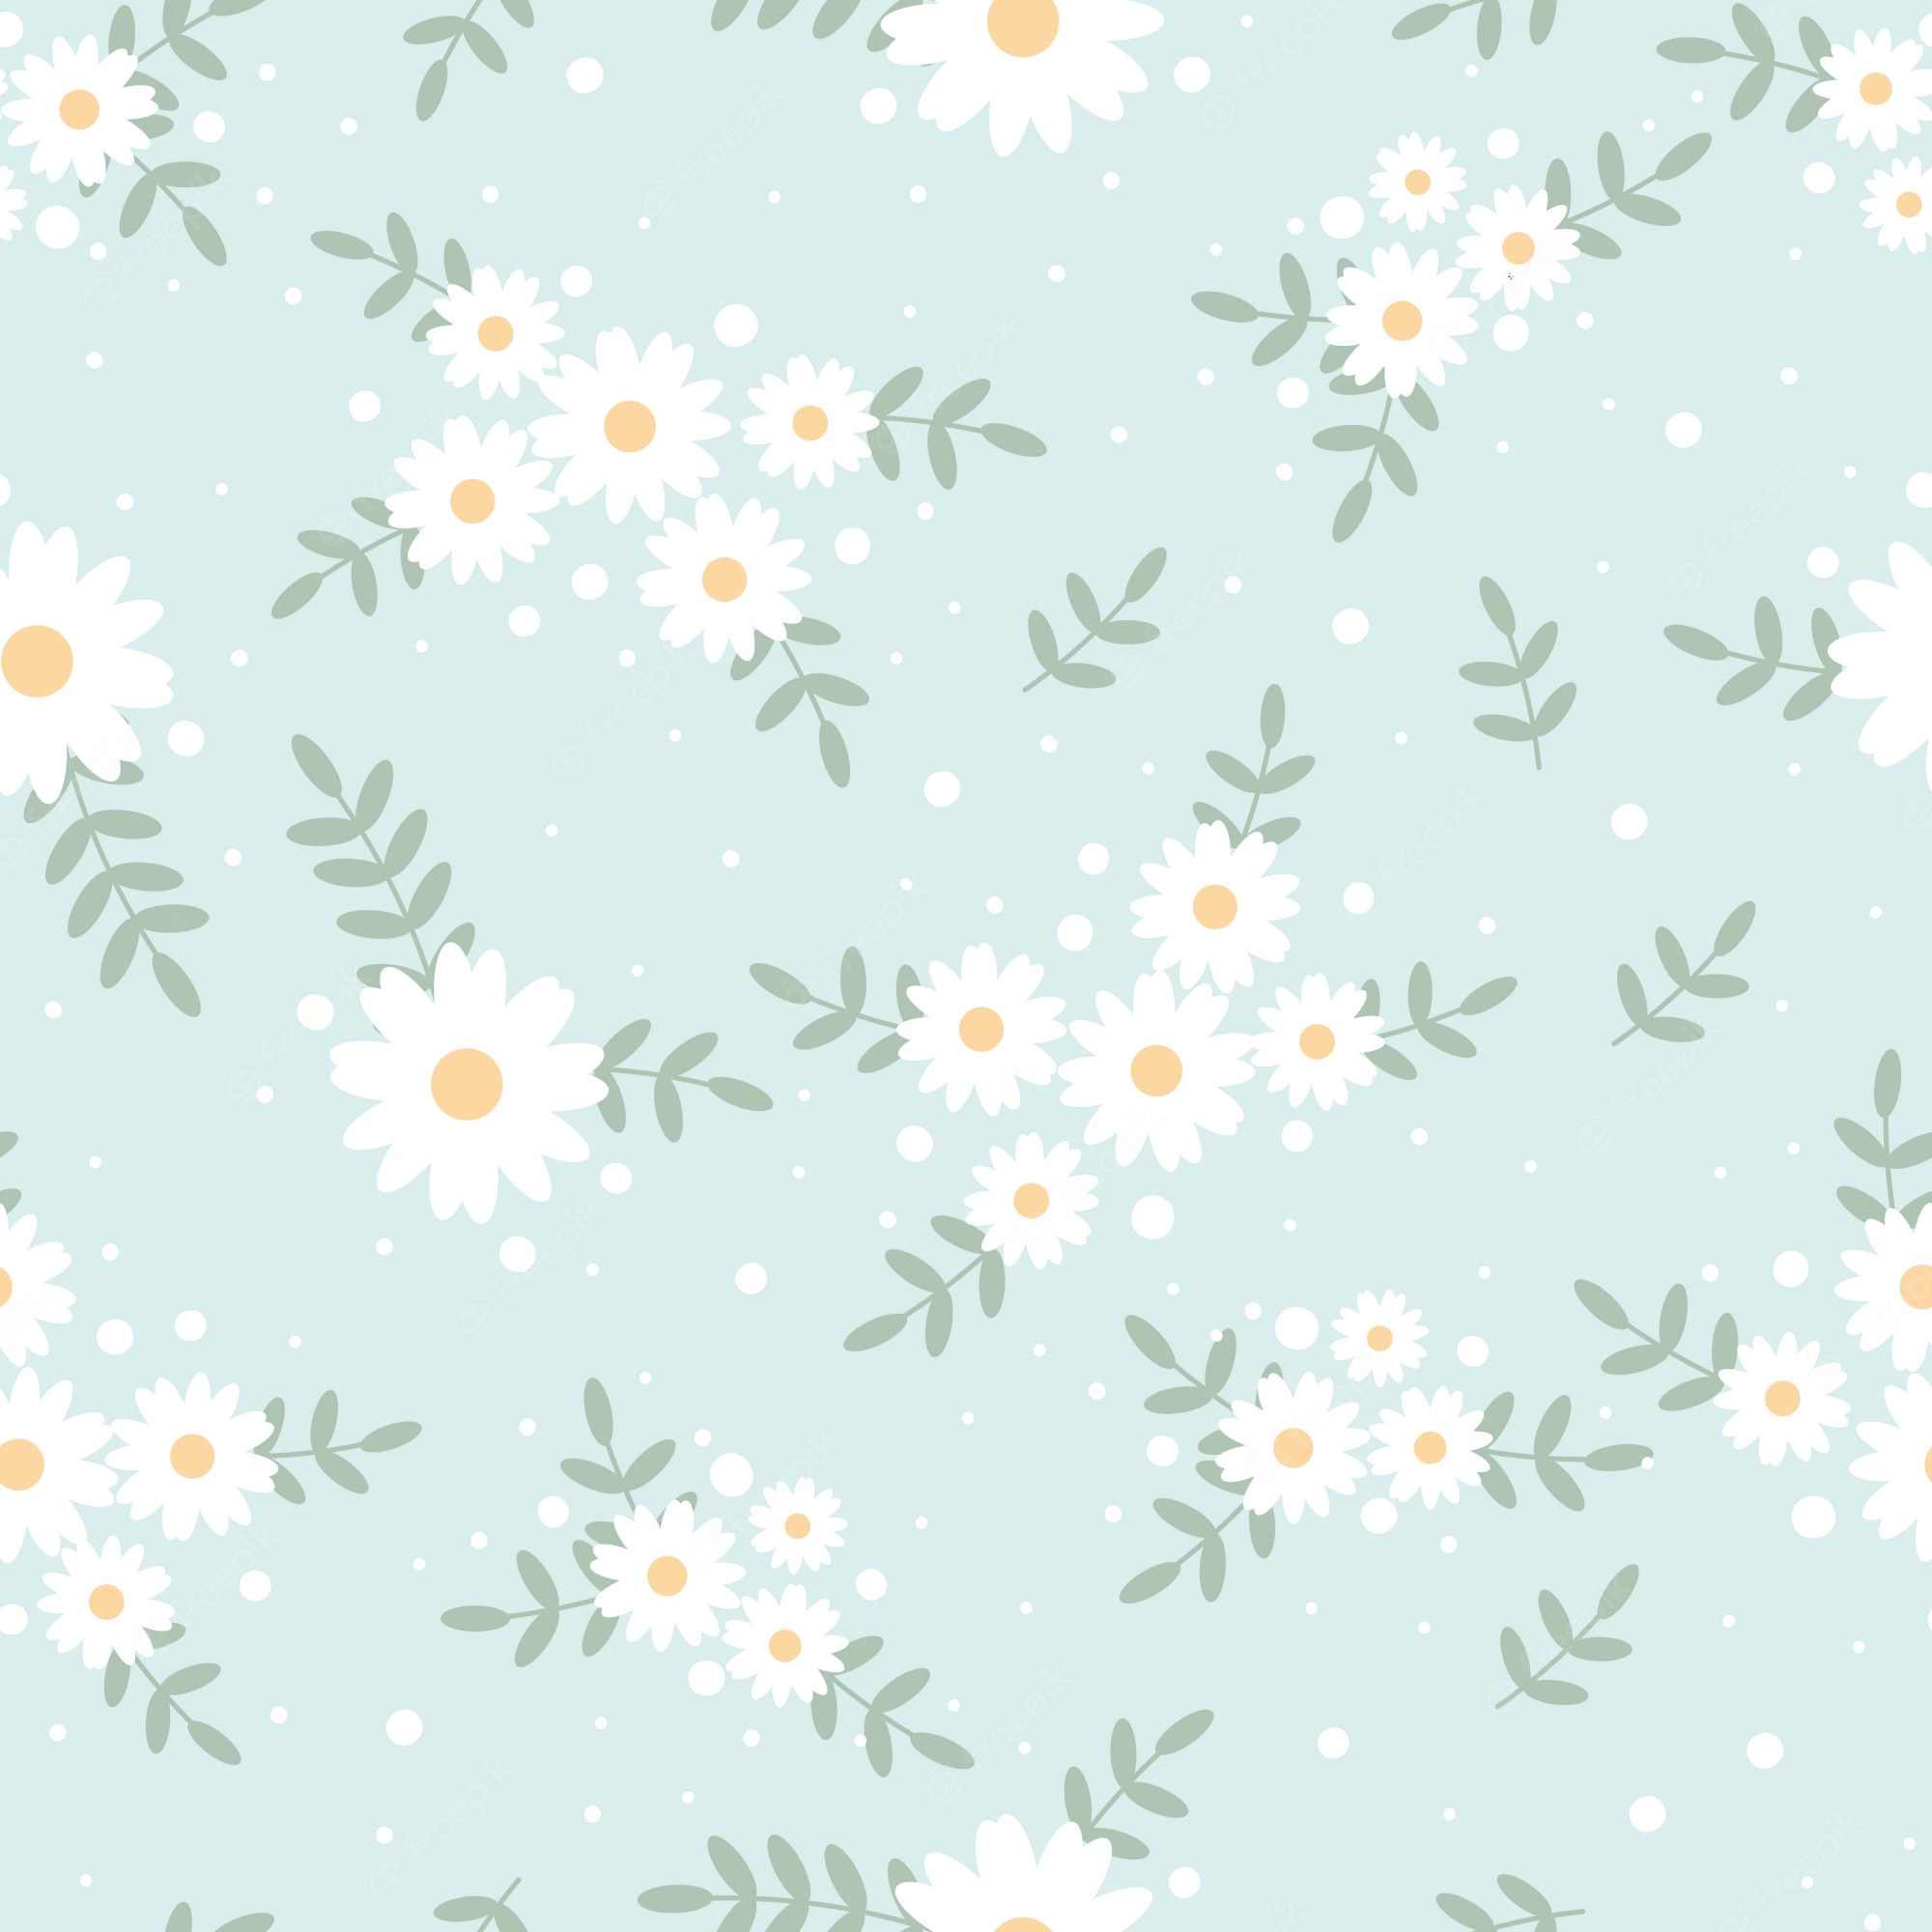 A seamless pattern of daisies and leaves - Daisy